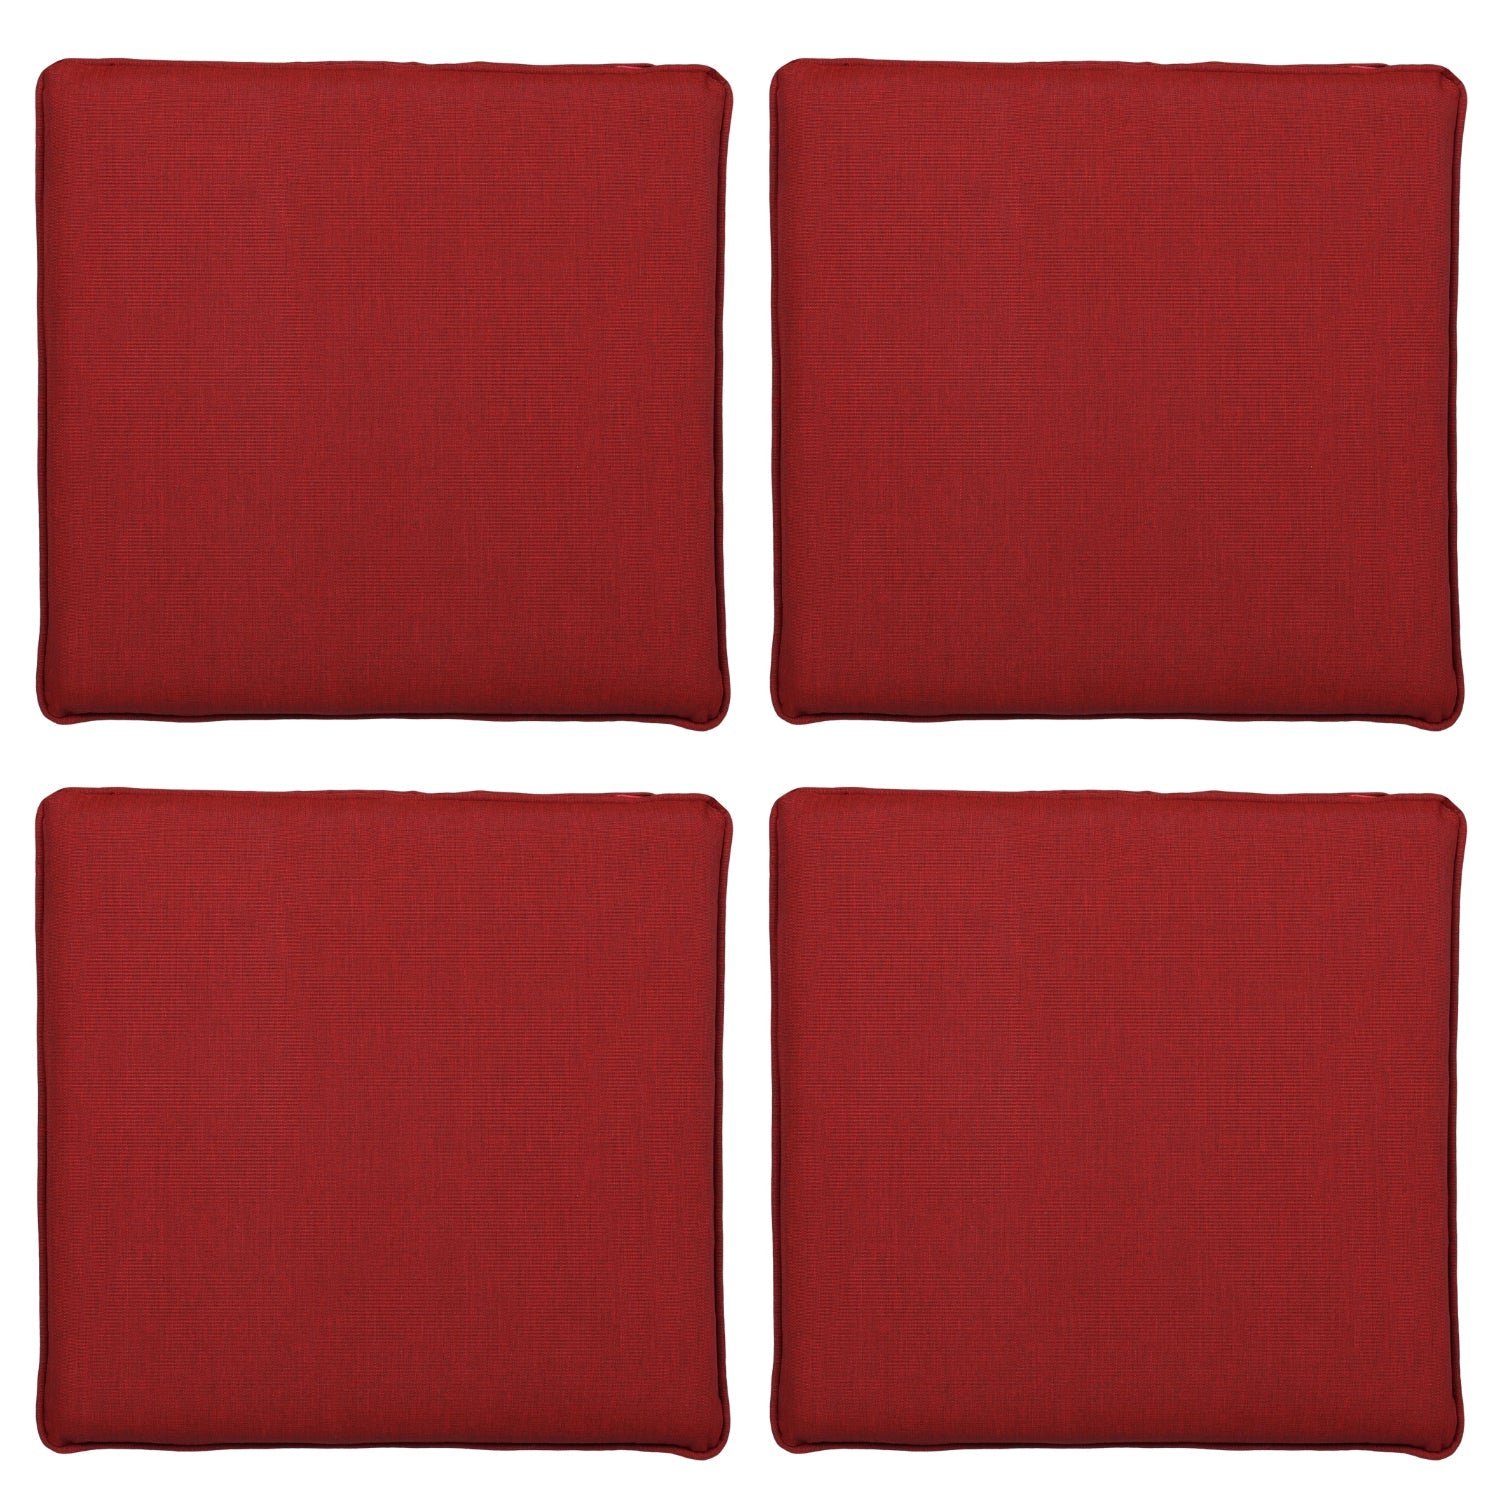 Patio Dinning Chair Cushion with Ties 19.7''X 18.9'' - Set of 4 CUSHION Aoodor Red  